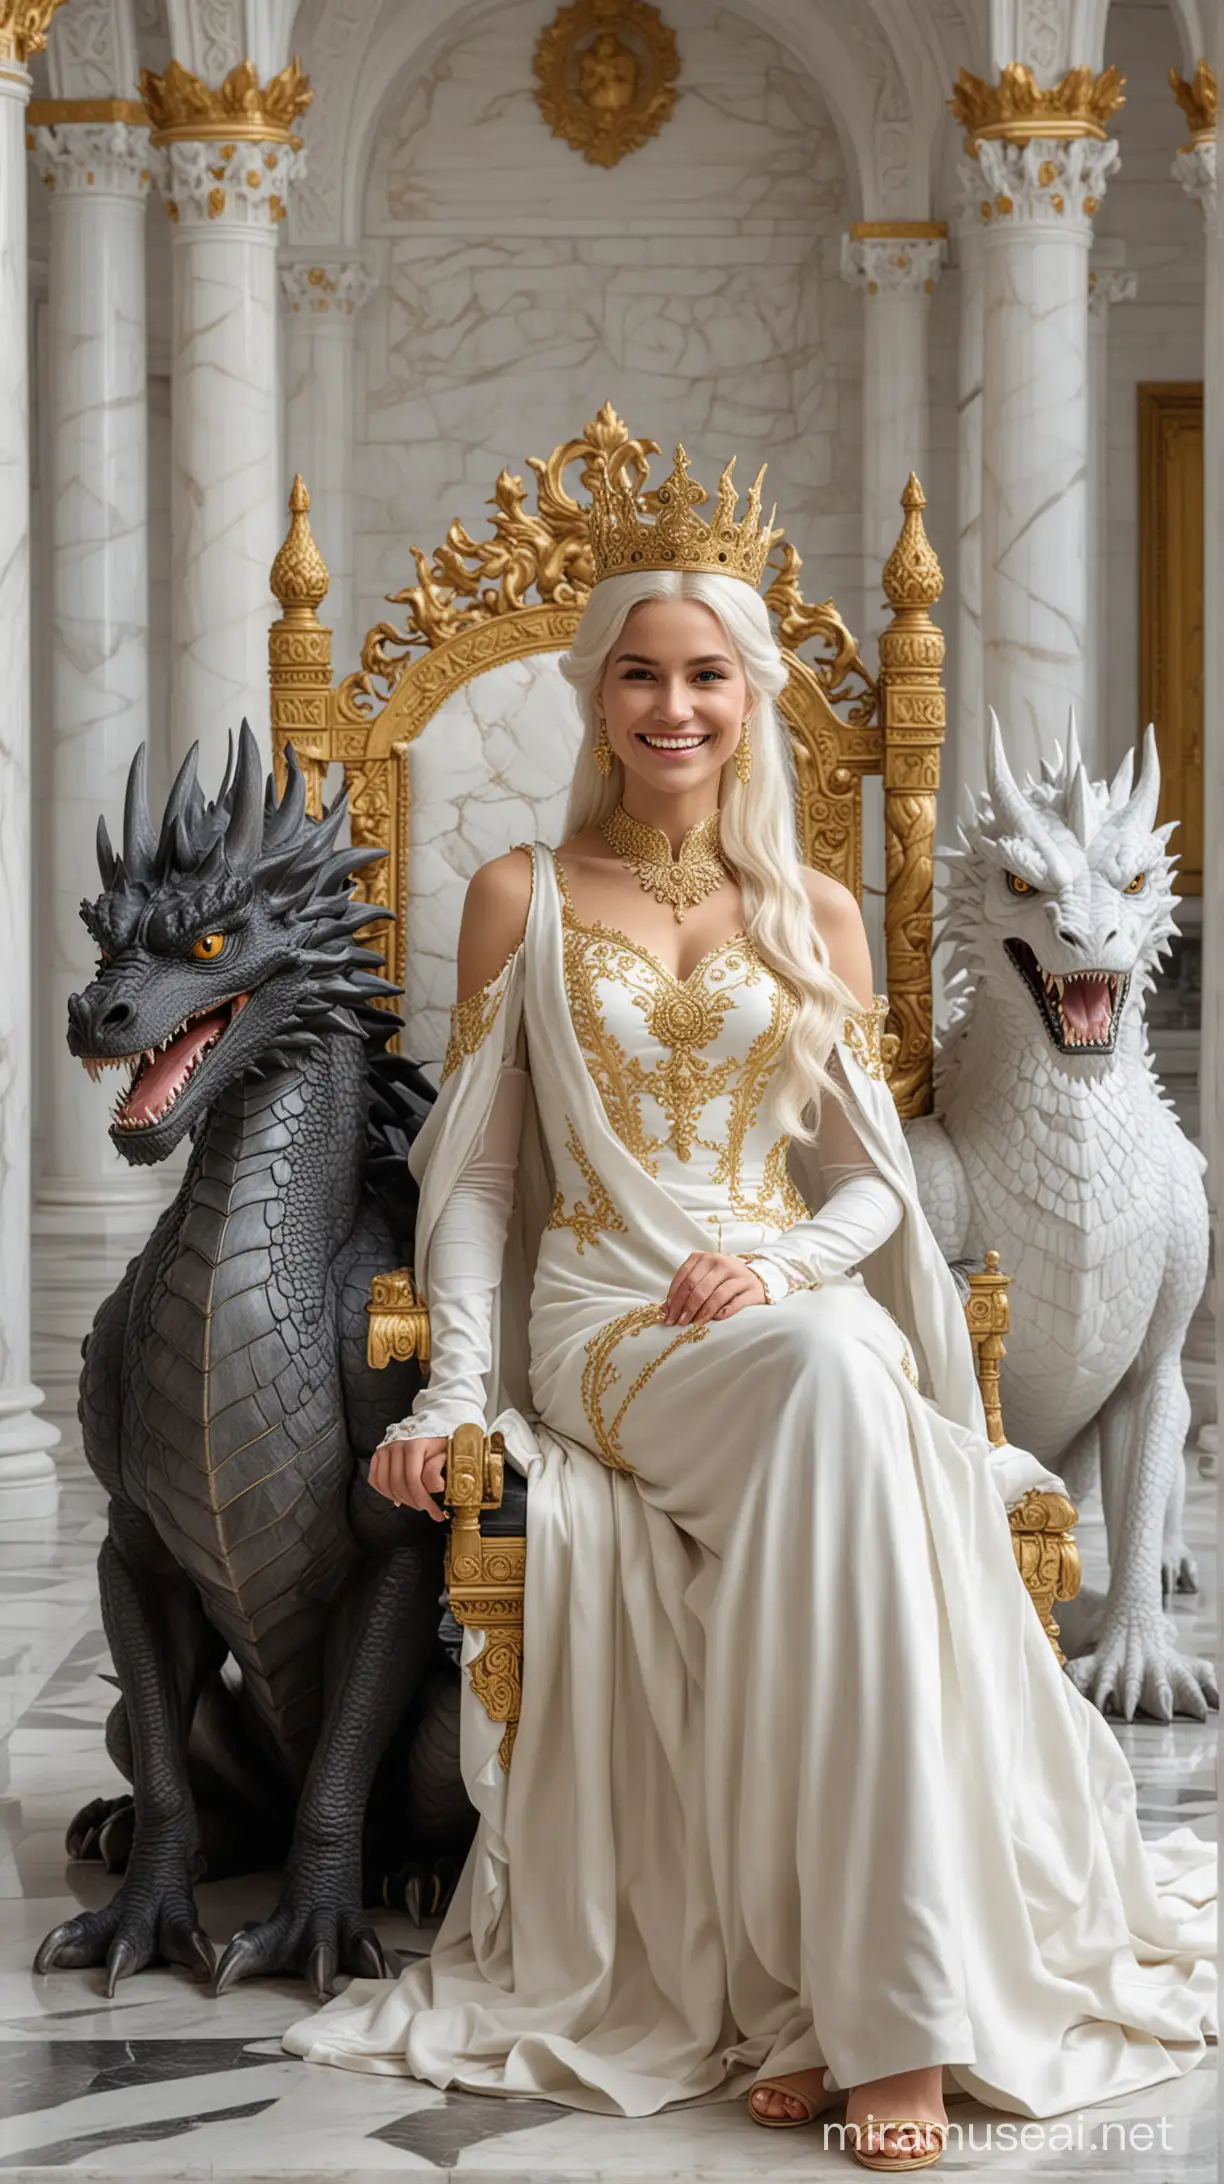 one  smiley queen with a golden dress and a white crown on her head, sitting on her throne and guarded by two large black real dragons, located in an all-white palace made of marble.